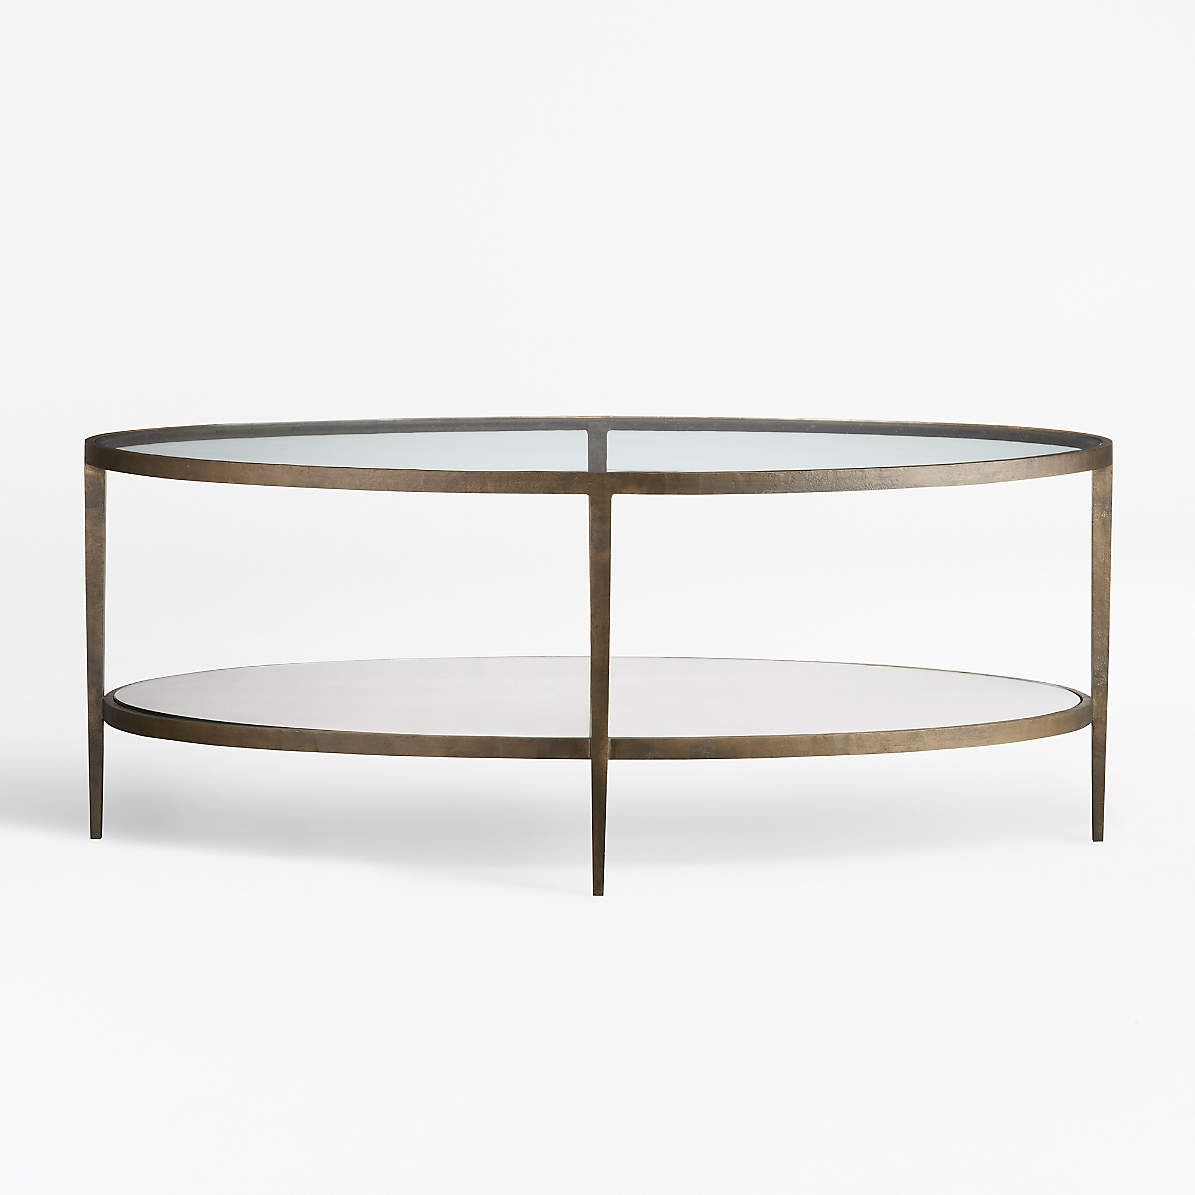 Clairemont Oval Coffee Table With Shelf + Reviews | Crate & Barrel Intended For Metal Oval Coffee Tables (View 17 of 20)